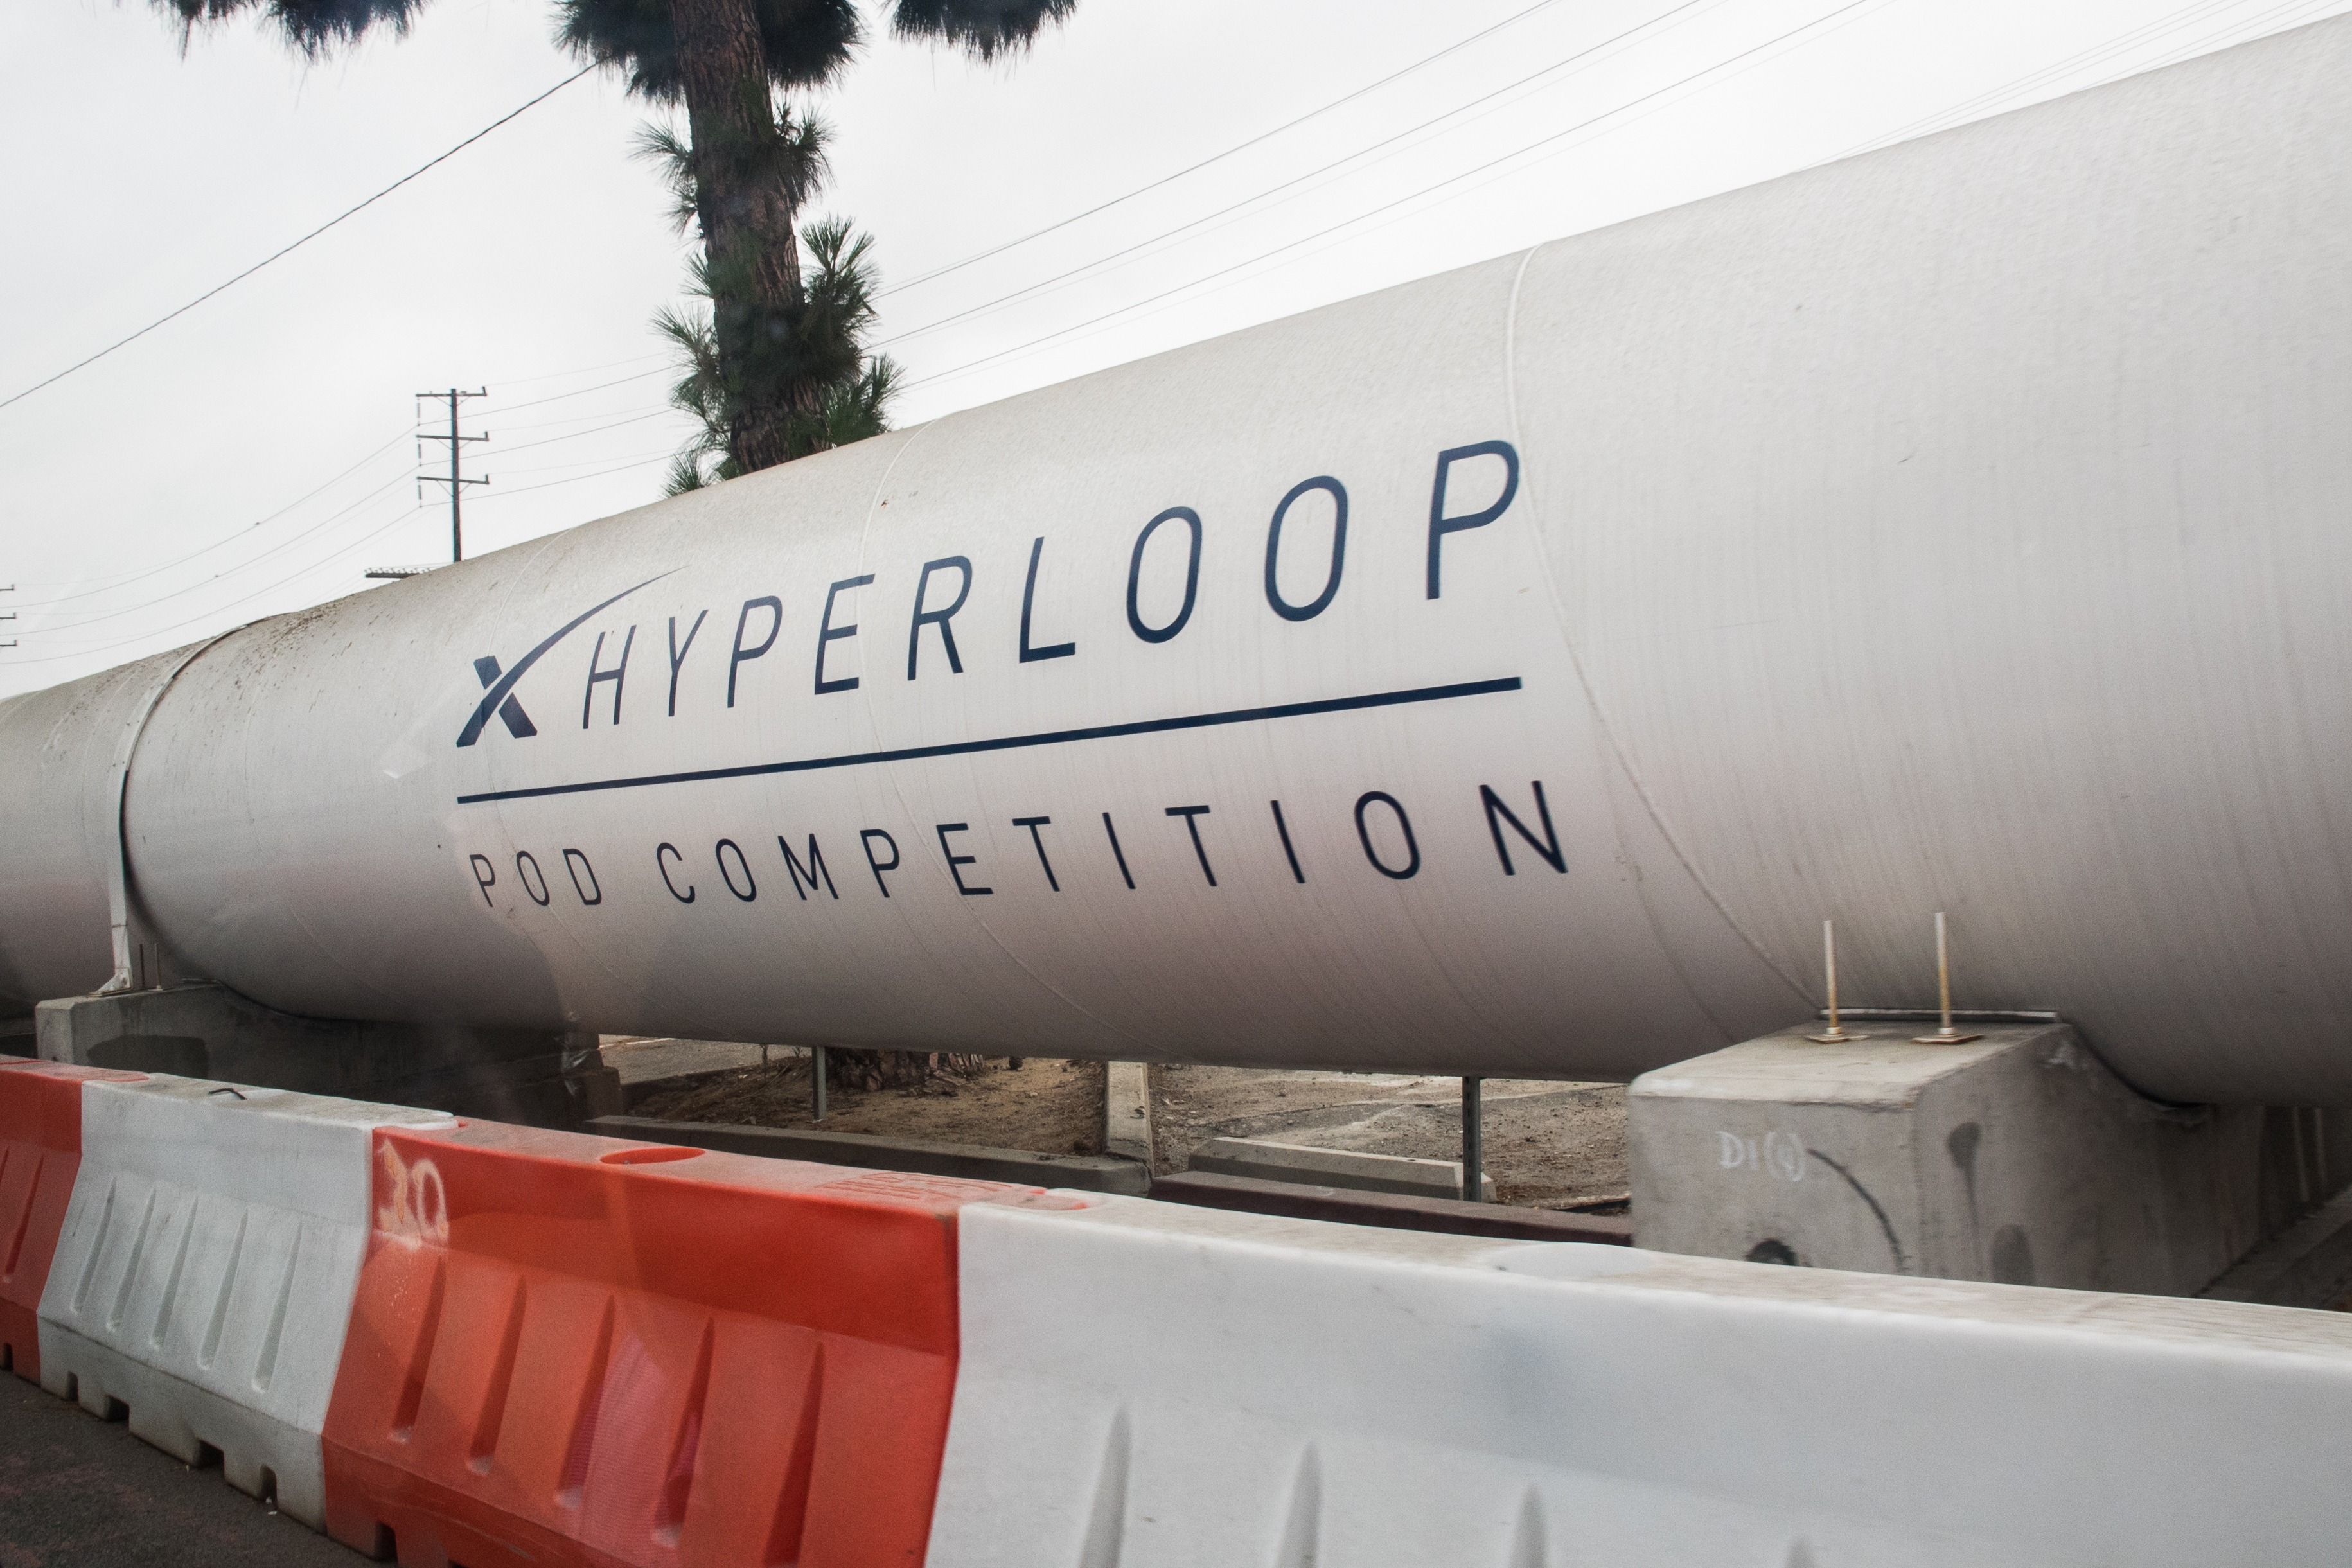 Hyperloop Pod Competition tube (Source: Wikimedia Commons)